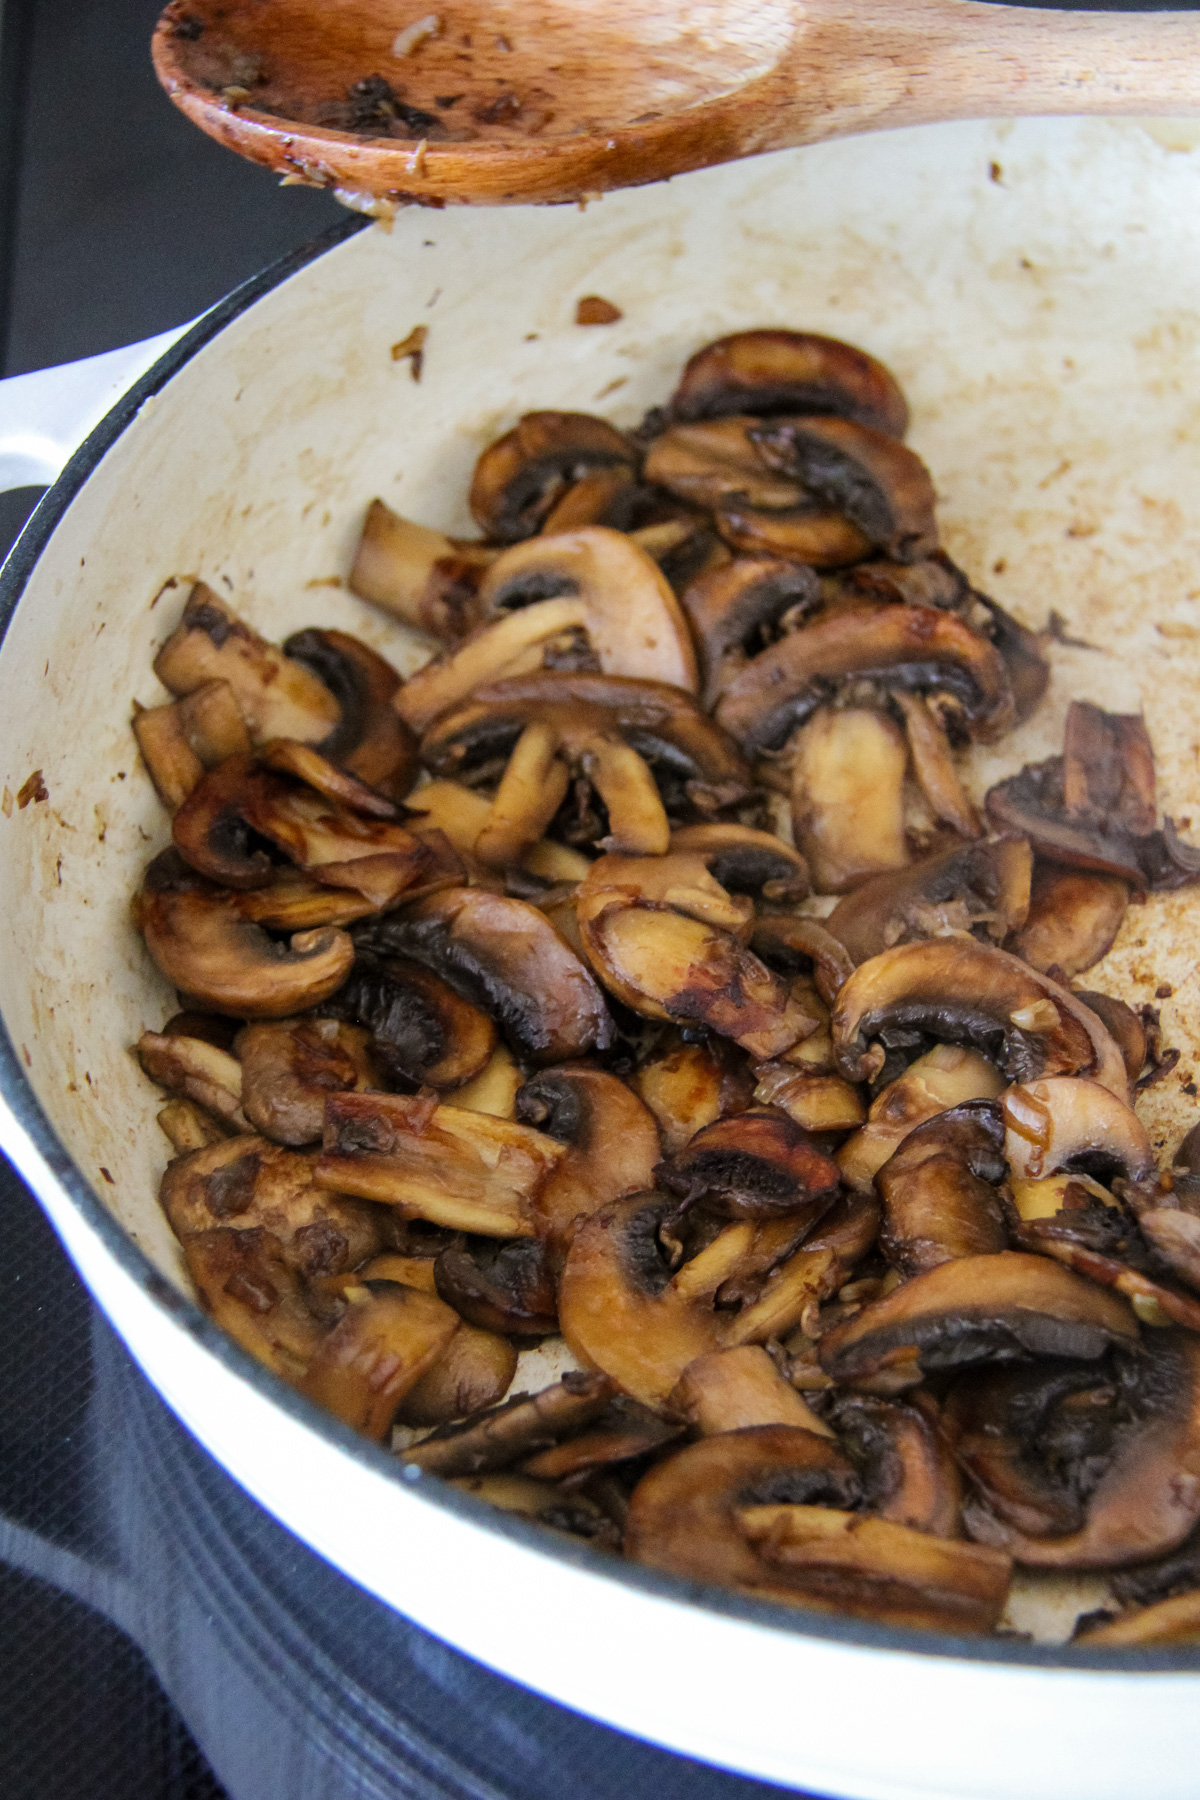 an enamel dish filled with sliced cooked mushrooms